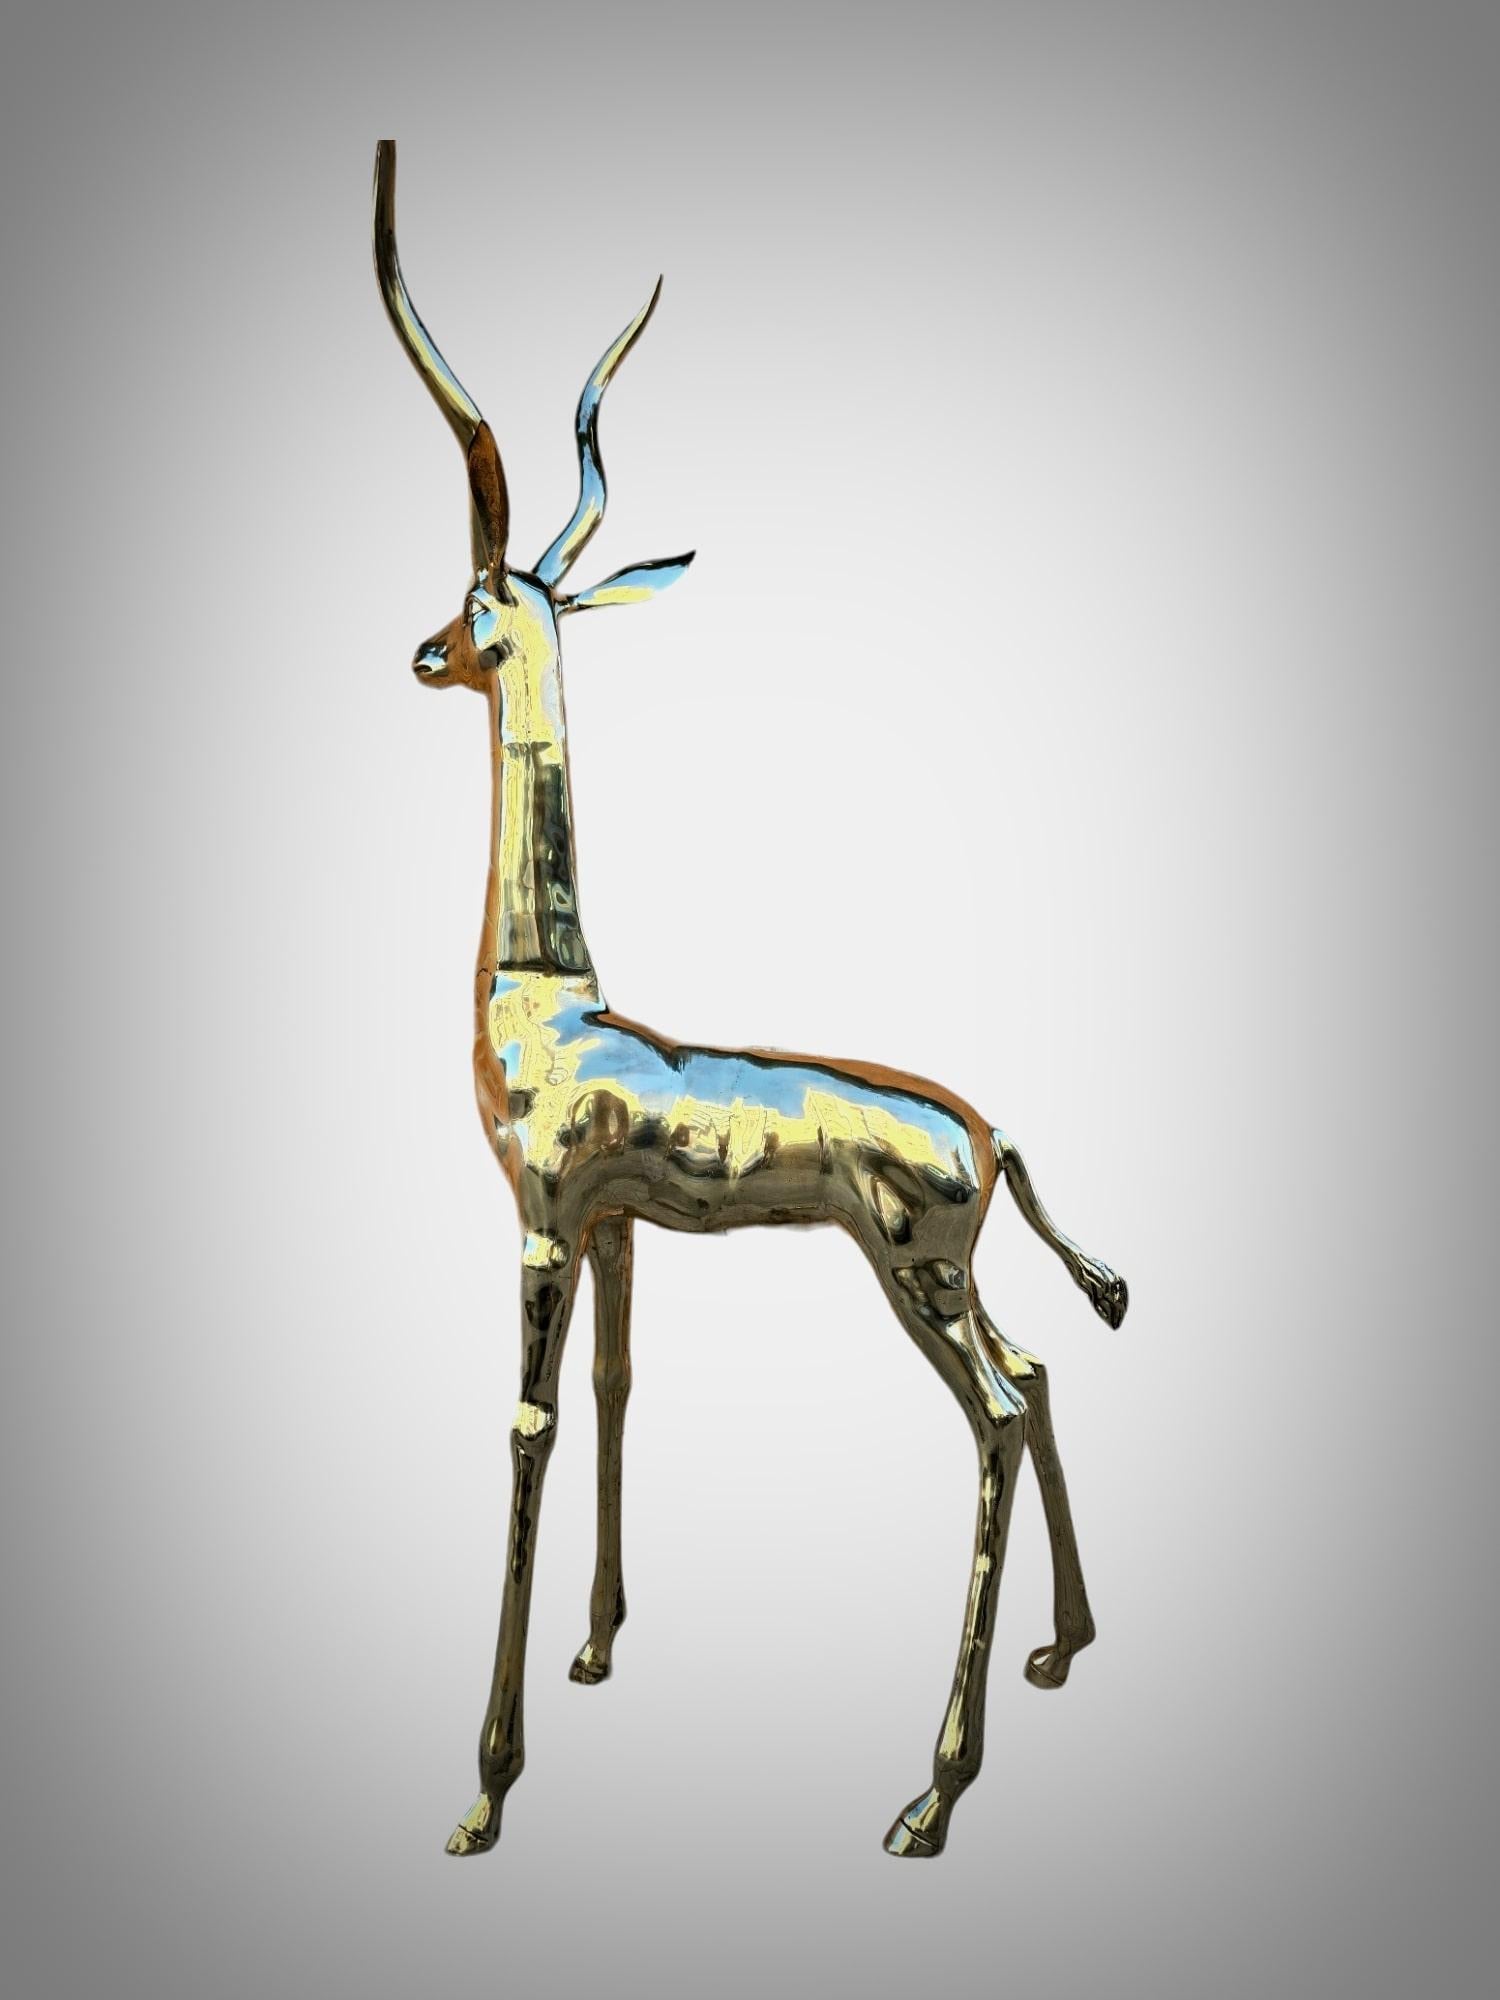 Mid-20th Century Exquisite Polished Bronze Sculpture: Lifesize Antelope from the 1950s For Sale